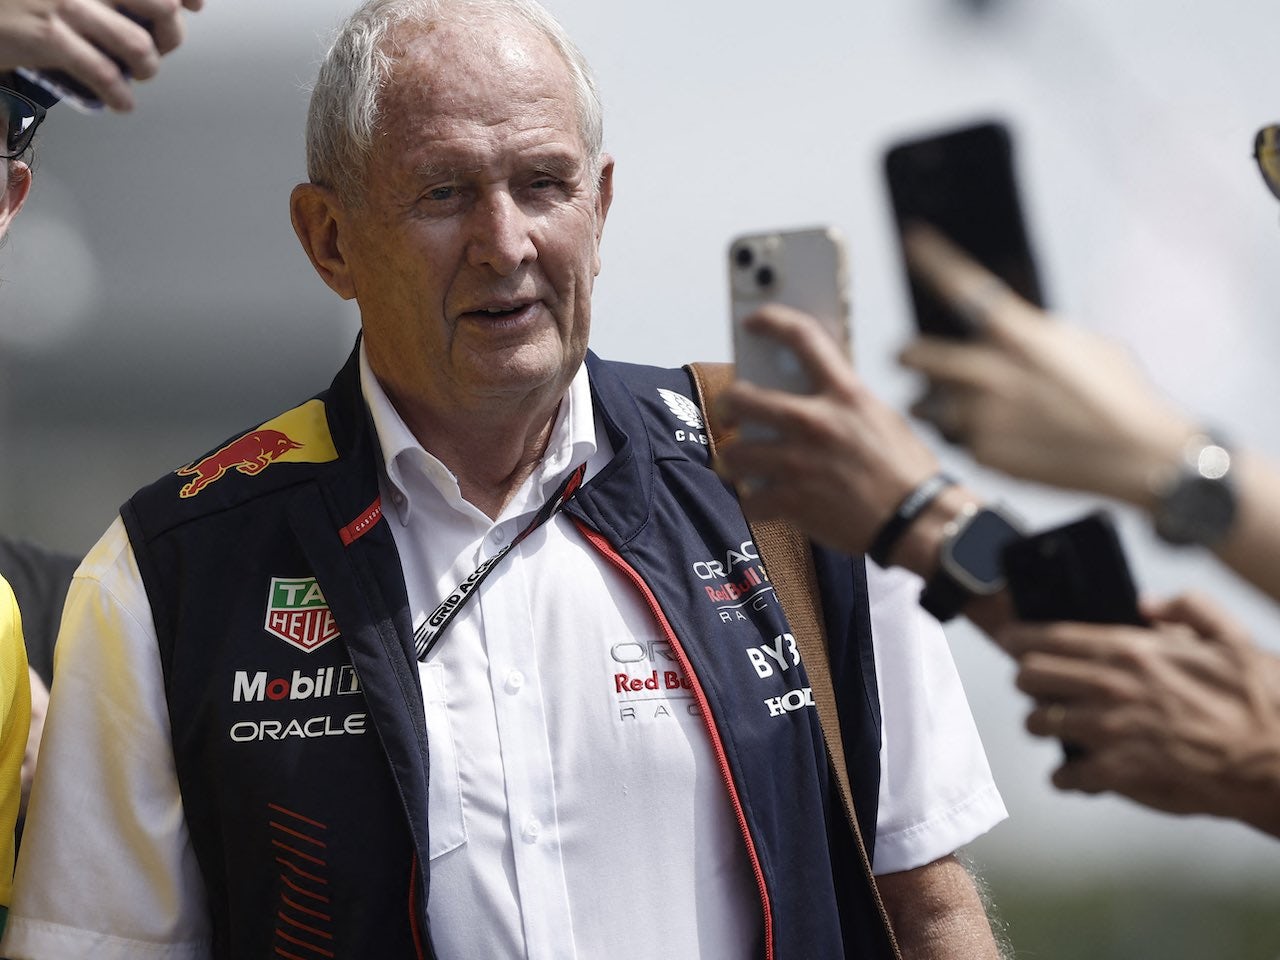 Marko worried about F1 rival discovering 'special trick'